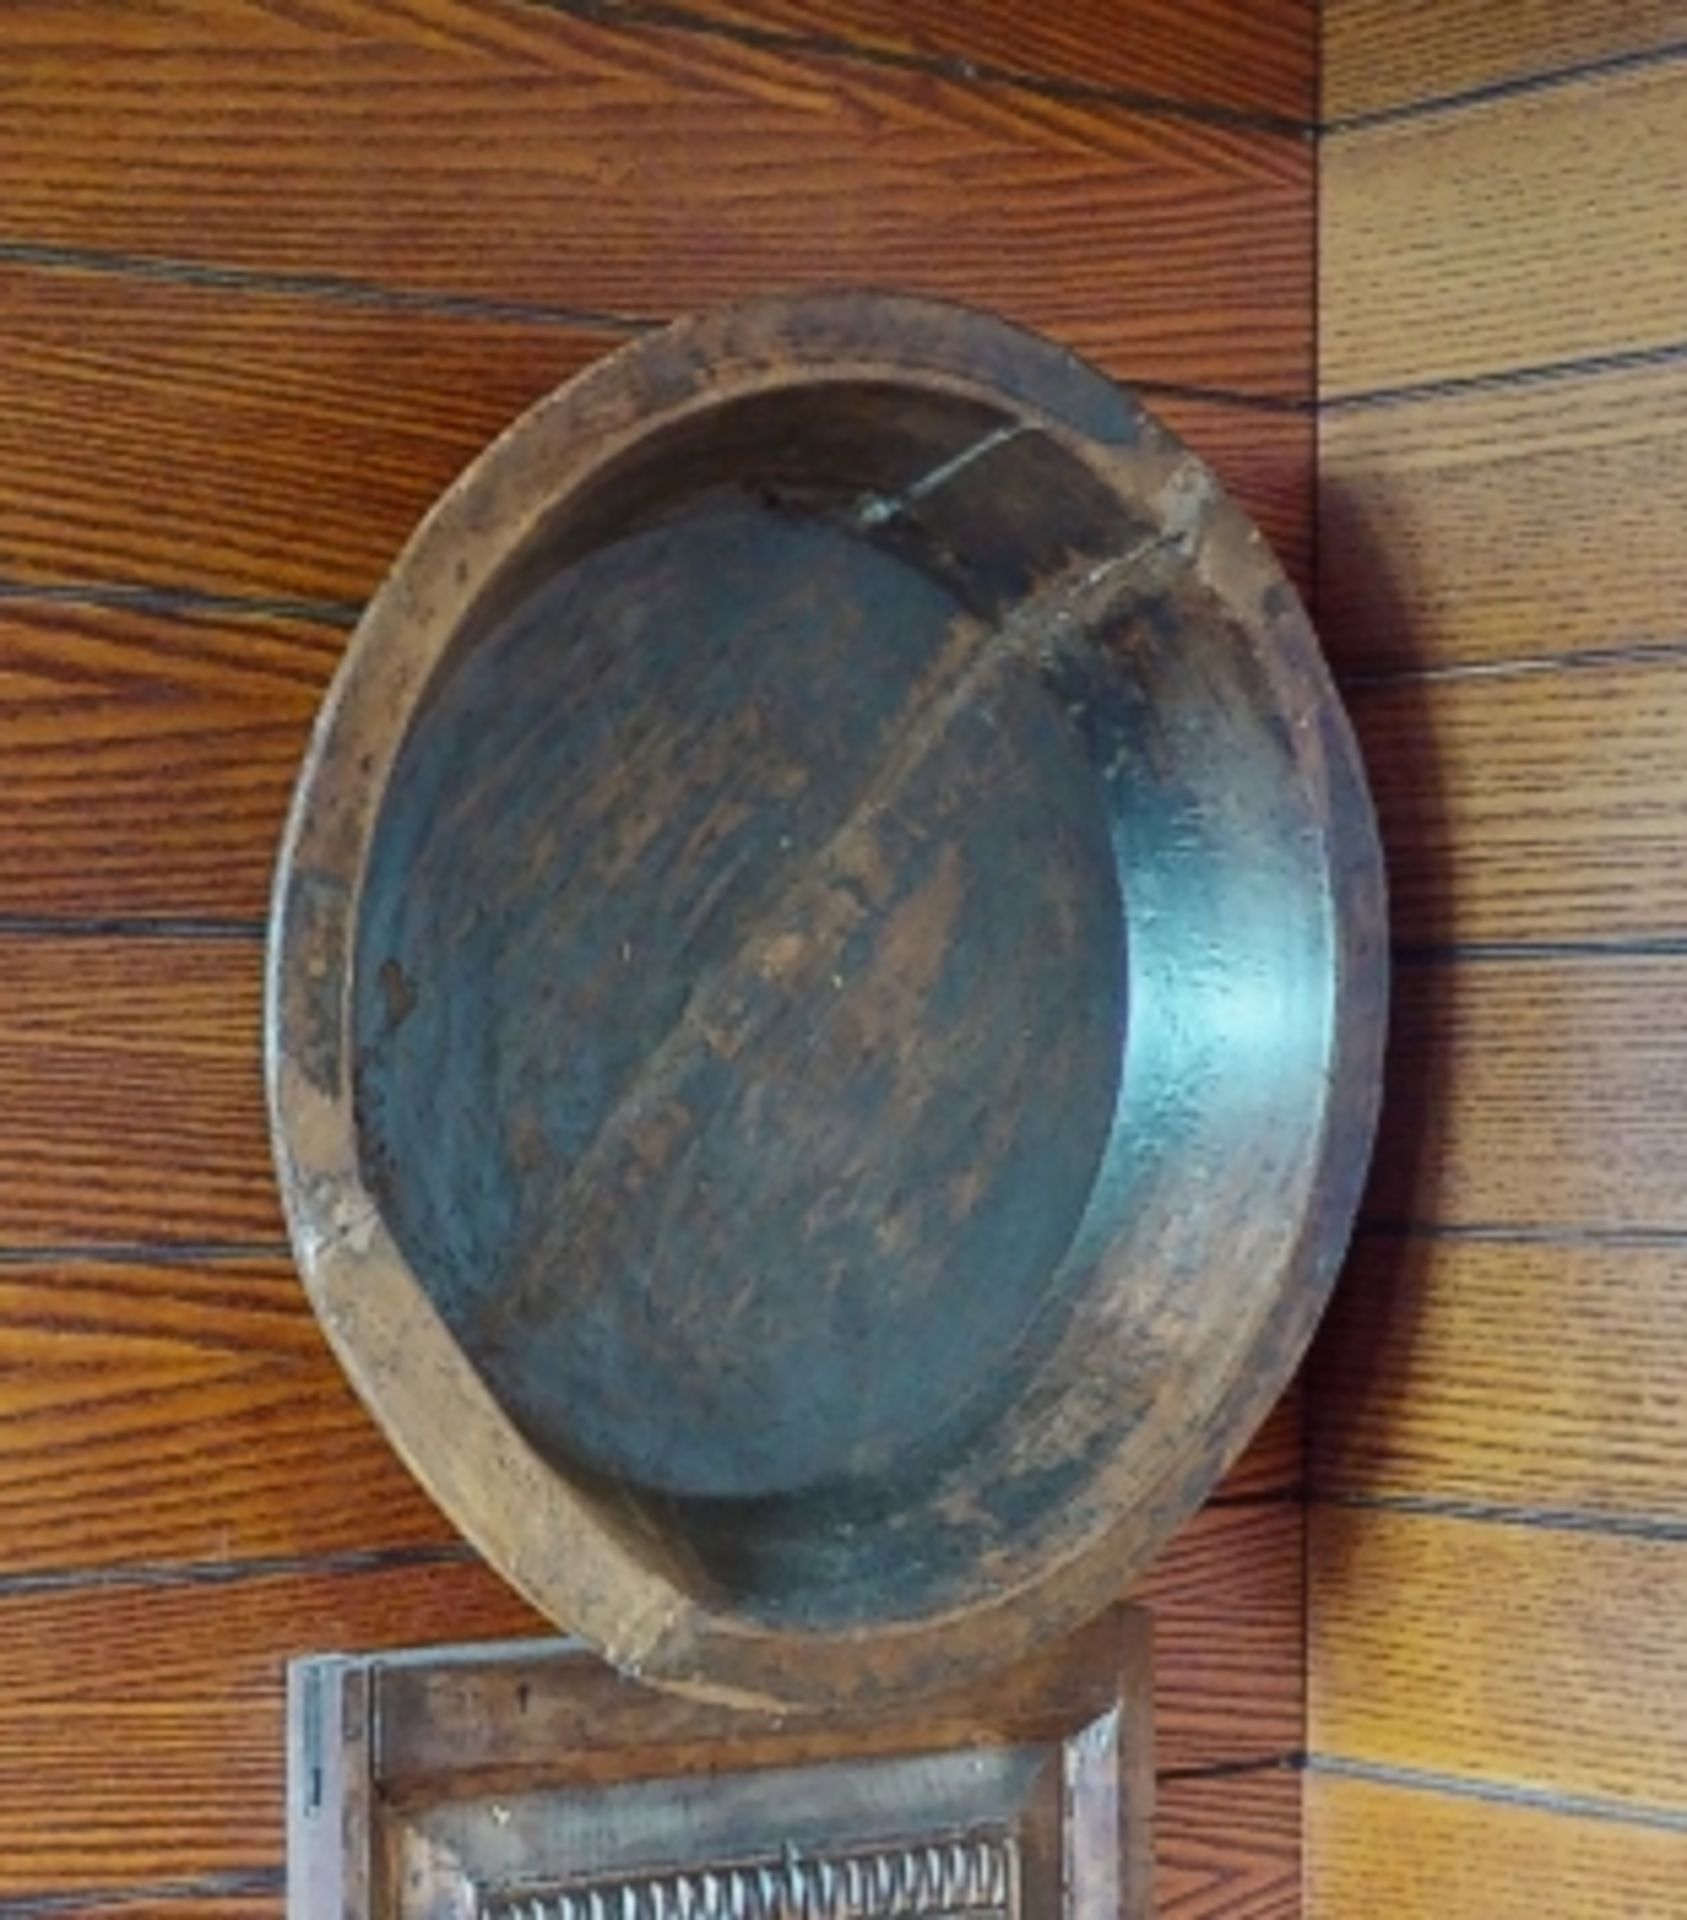 11 x Large Rustic Wooden Dishes - Wall Art From a Mexican Themed Restaurant - Image 4 of 8